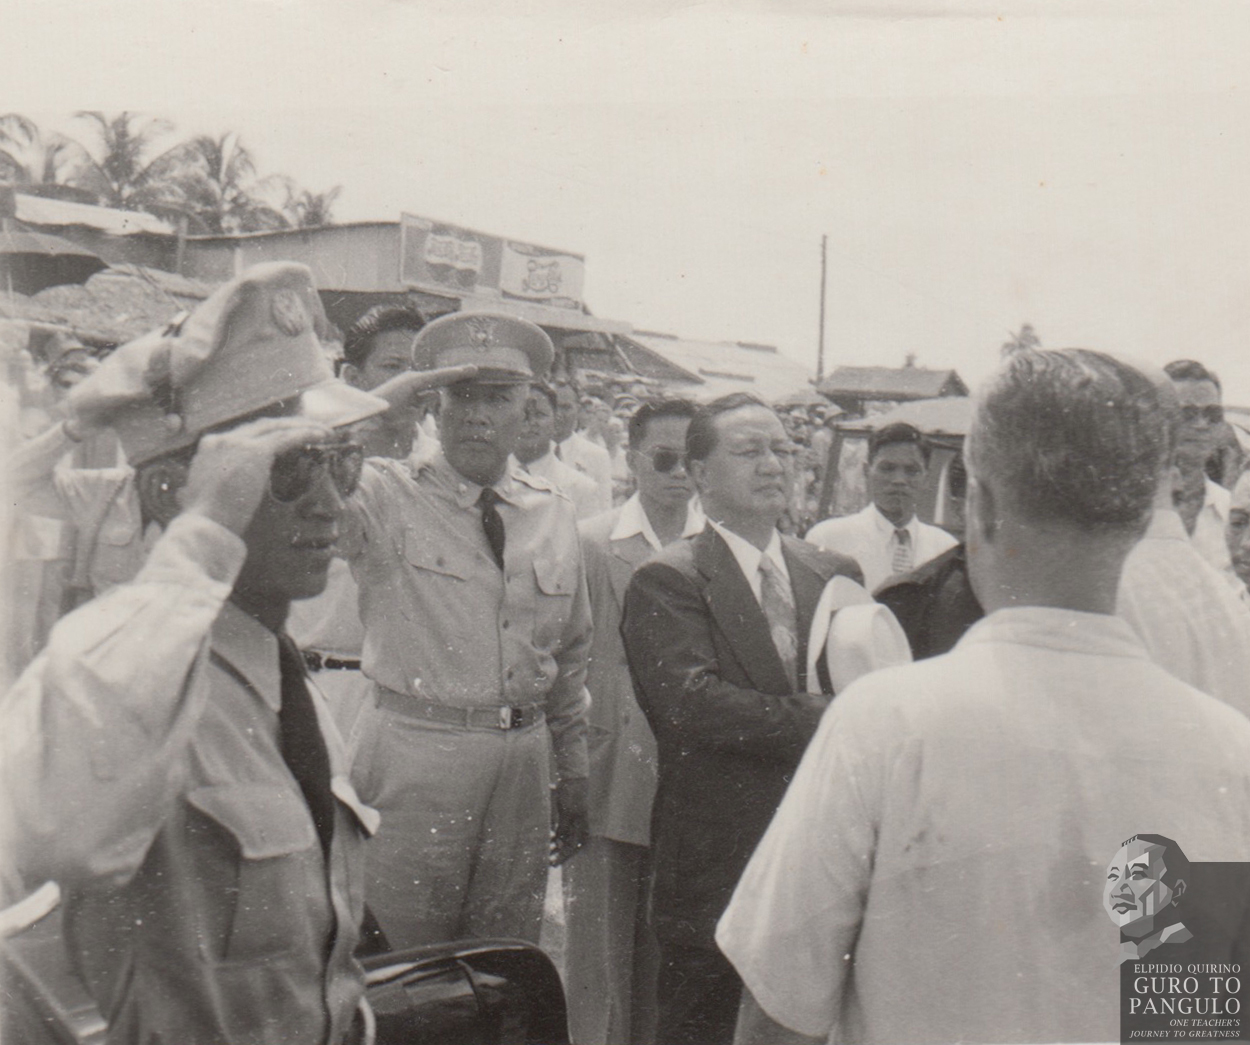 President Elpidio Quirino, responsible for accepting thousands of White Russians into the Philippines, visited the camp in Tubabao on October 28, 1949. When he was there, he noticed a barbed-wire fence surrounding the camp and immediately ordered to have it taken down. This, to the refugees, was a noble act of kindness, one that made them feel they were not in a refugee camp but that they were trustworthy and peace-loving people who belonged to society. Photo by Nikolai Hidchenko 